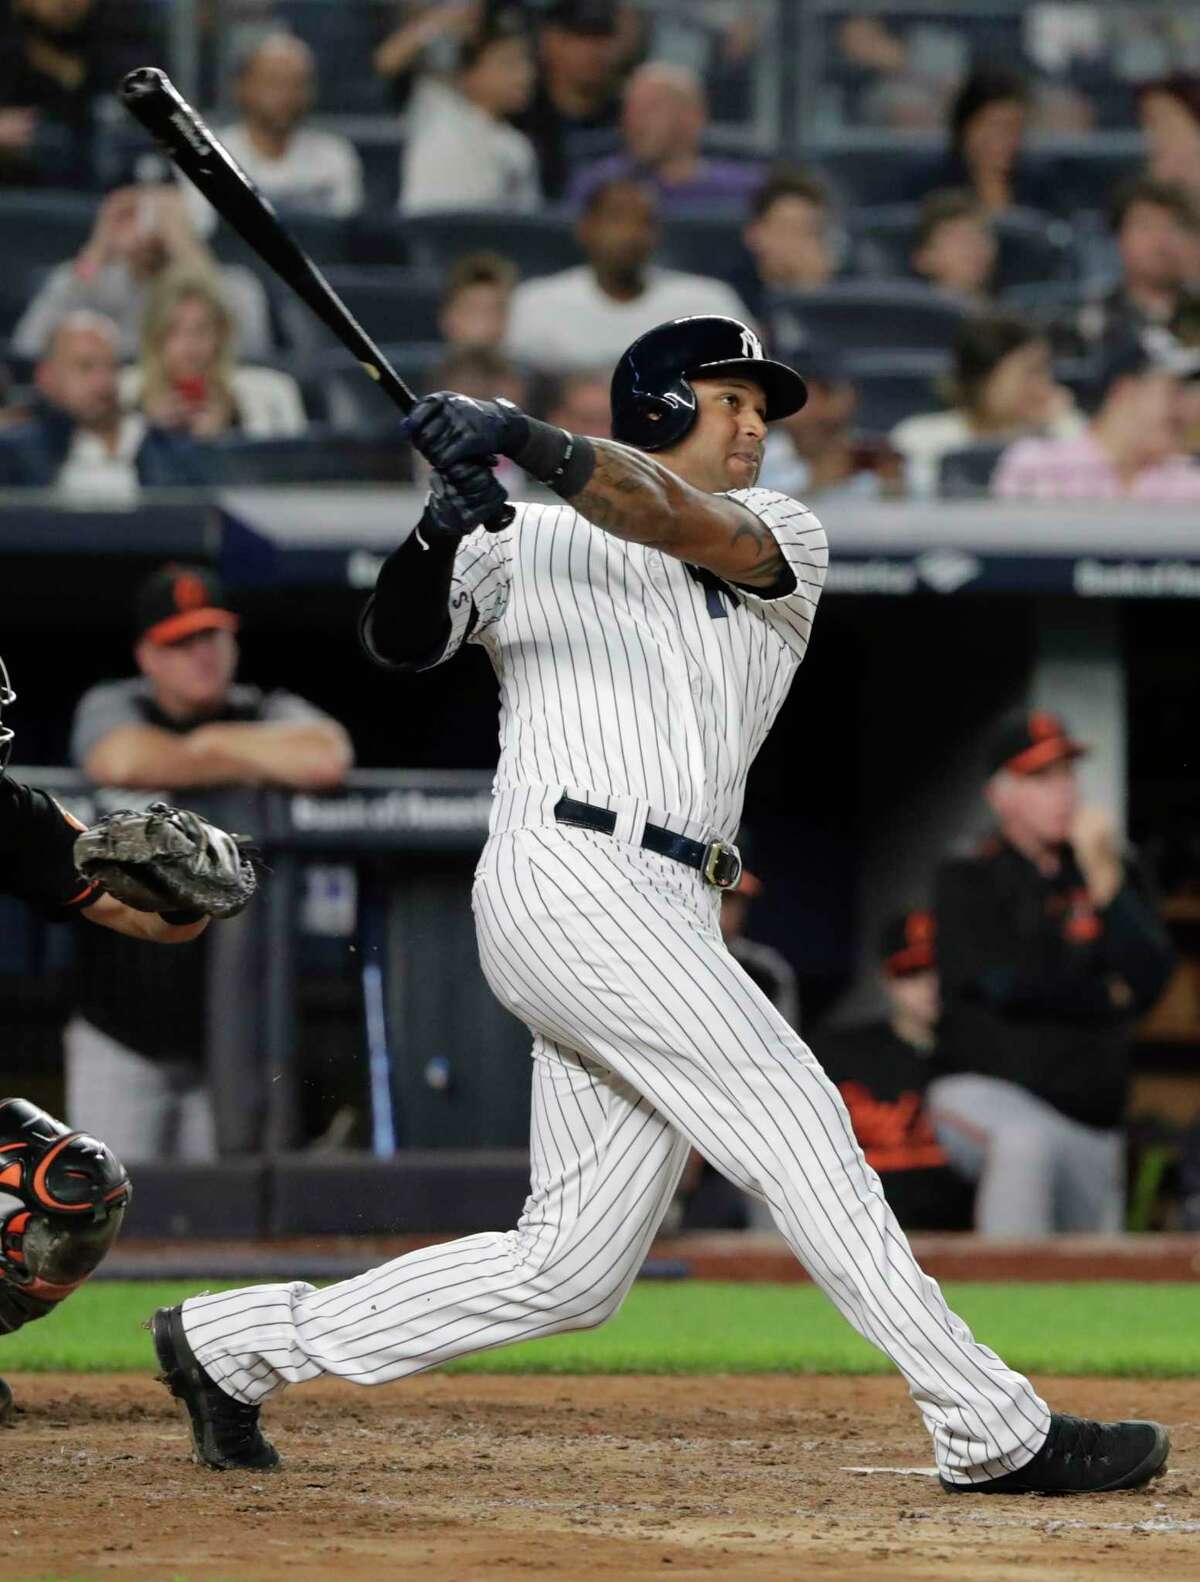 New York Yankees' Aaron Hicks follows through on a two-run home run during the fourth inning of a baseball game against the Baltimore Orioles Friday, Sept. 21, 2018, in New York. (AP Photo/Frank Franklin II)